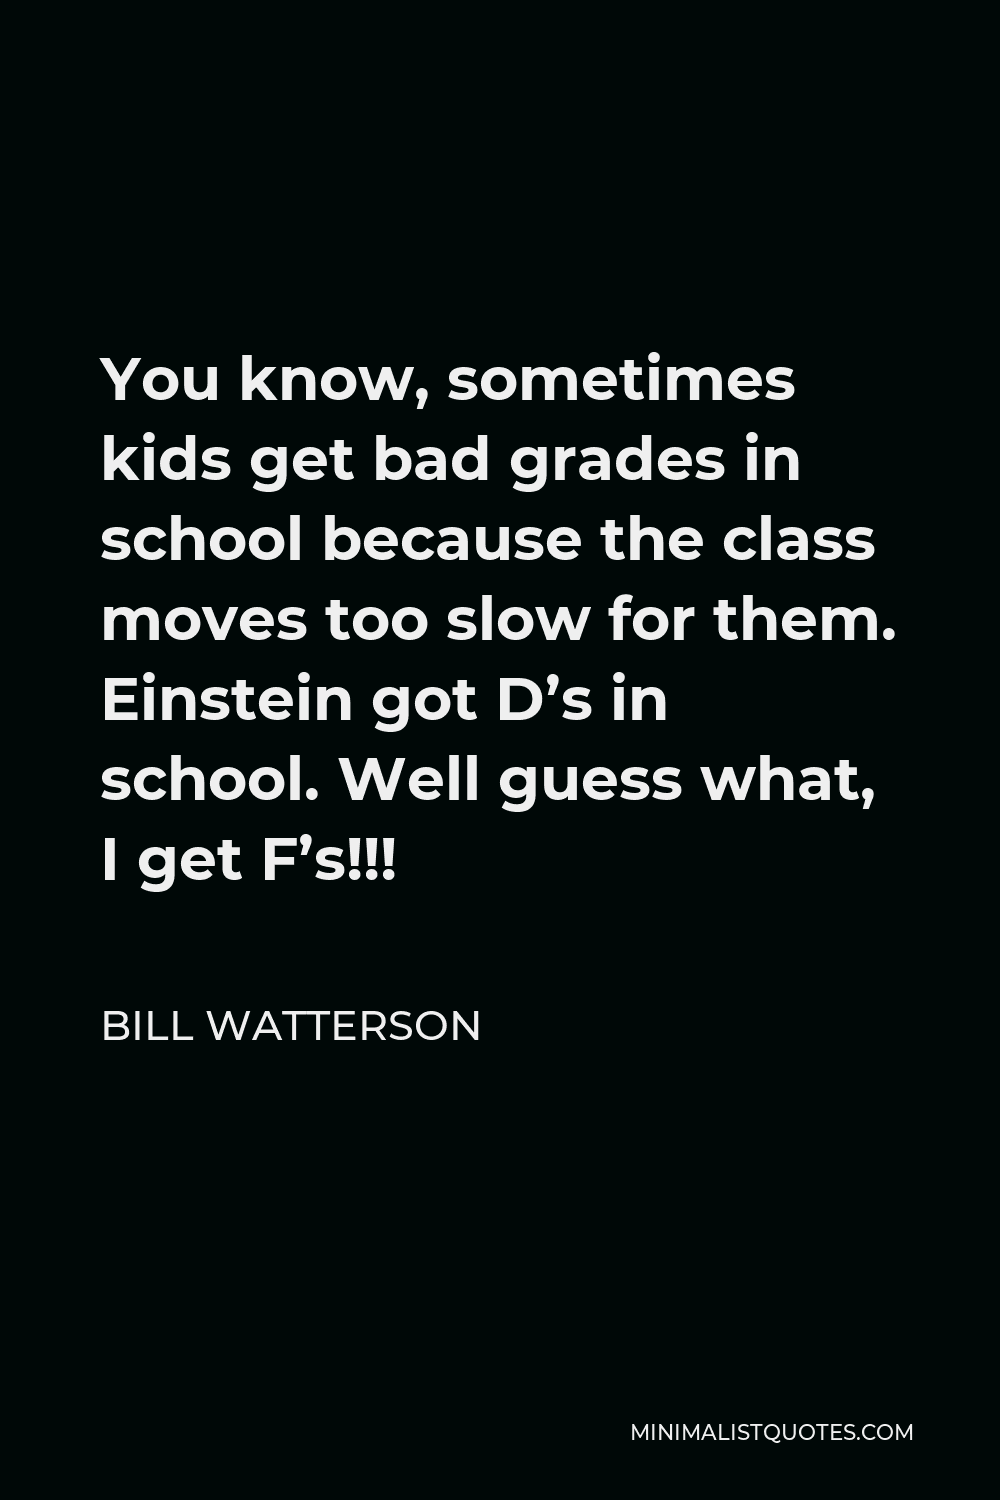 Bill Watterson Quote - You know, sometimes kids get bad grades in school because the class moves too slow for them. Einstein got D’s in school. Well guess what, I get F’s!!!